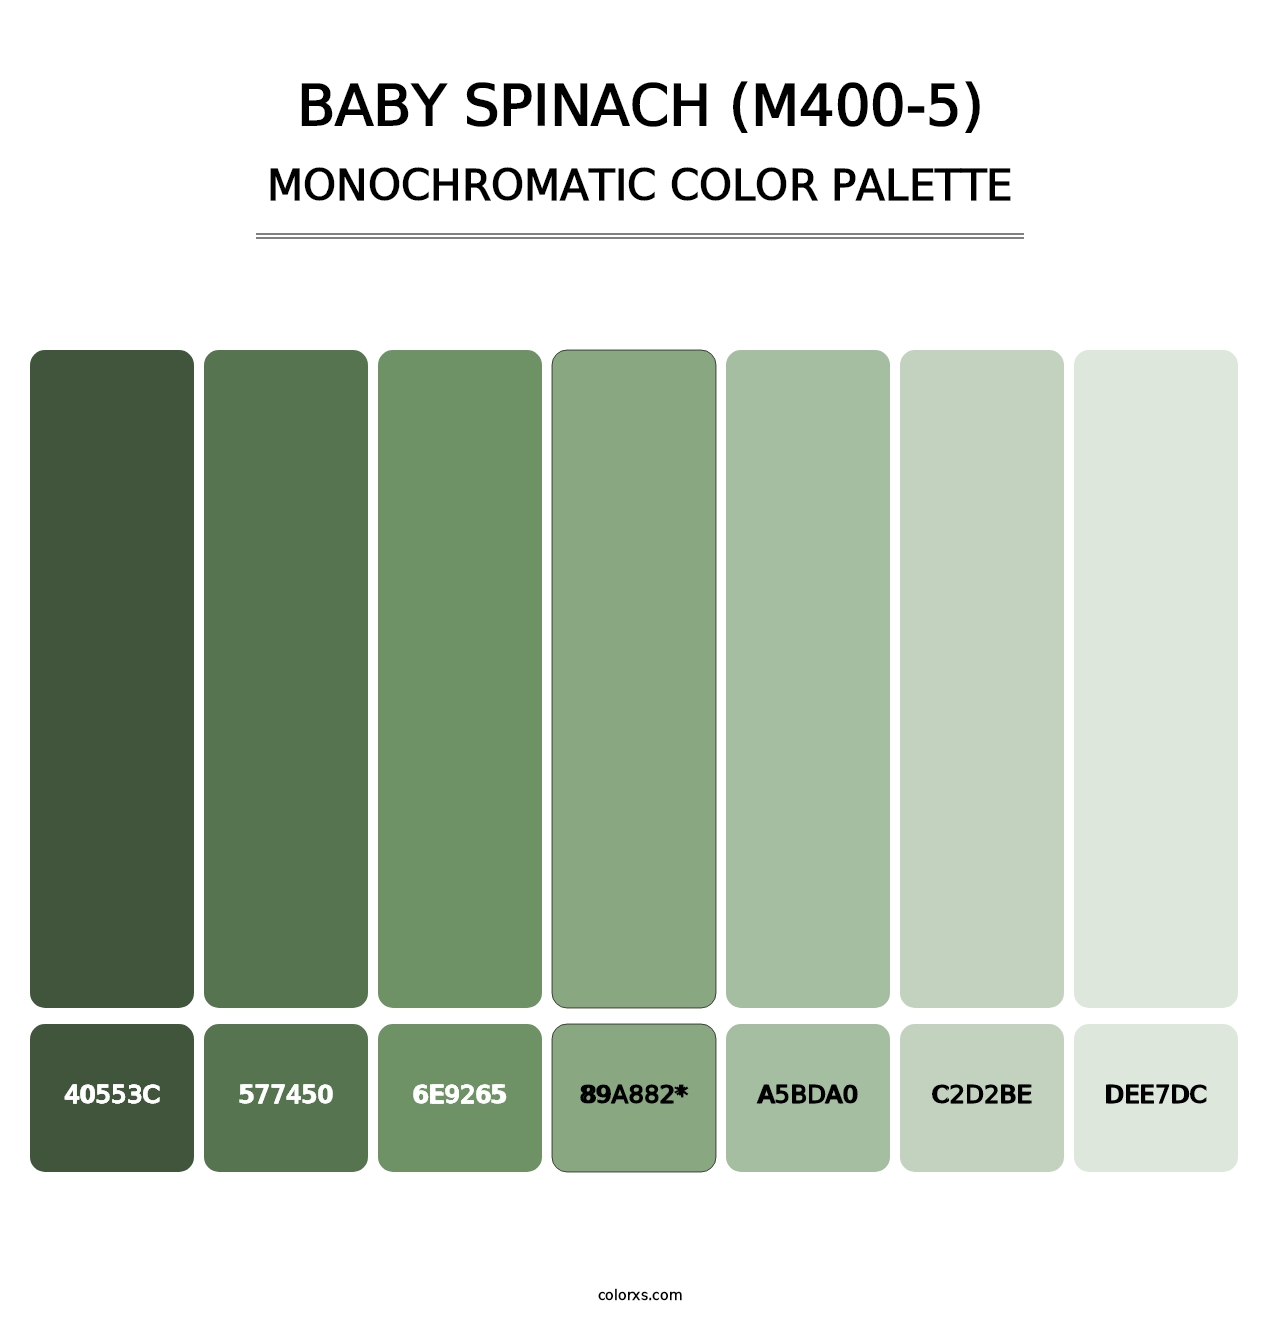 Baby Spinach (M400-5) - Monochromatic Color Palette